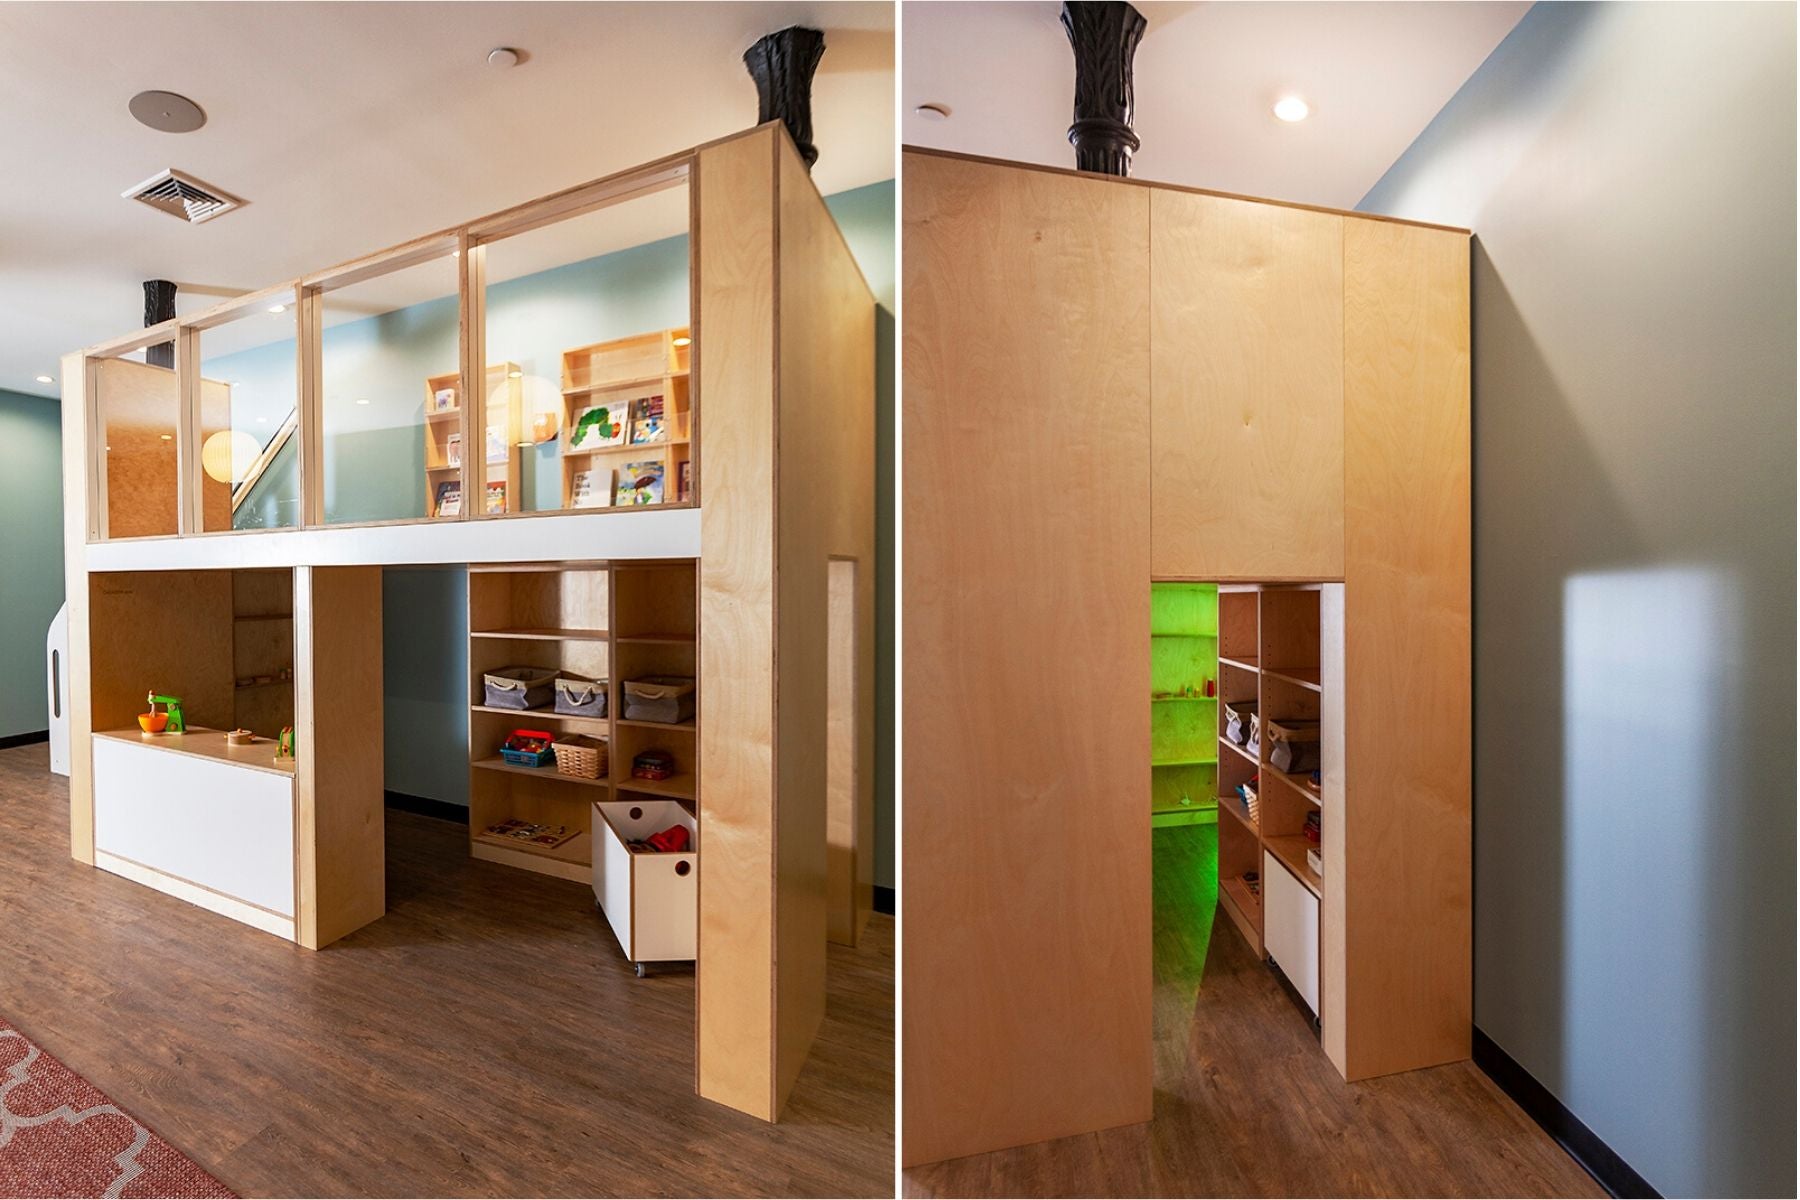 Wooden loft bed with storage and a hidden green nook.